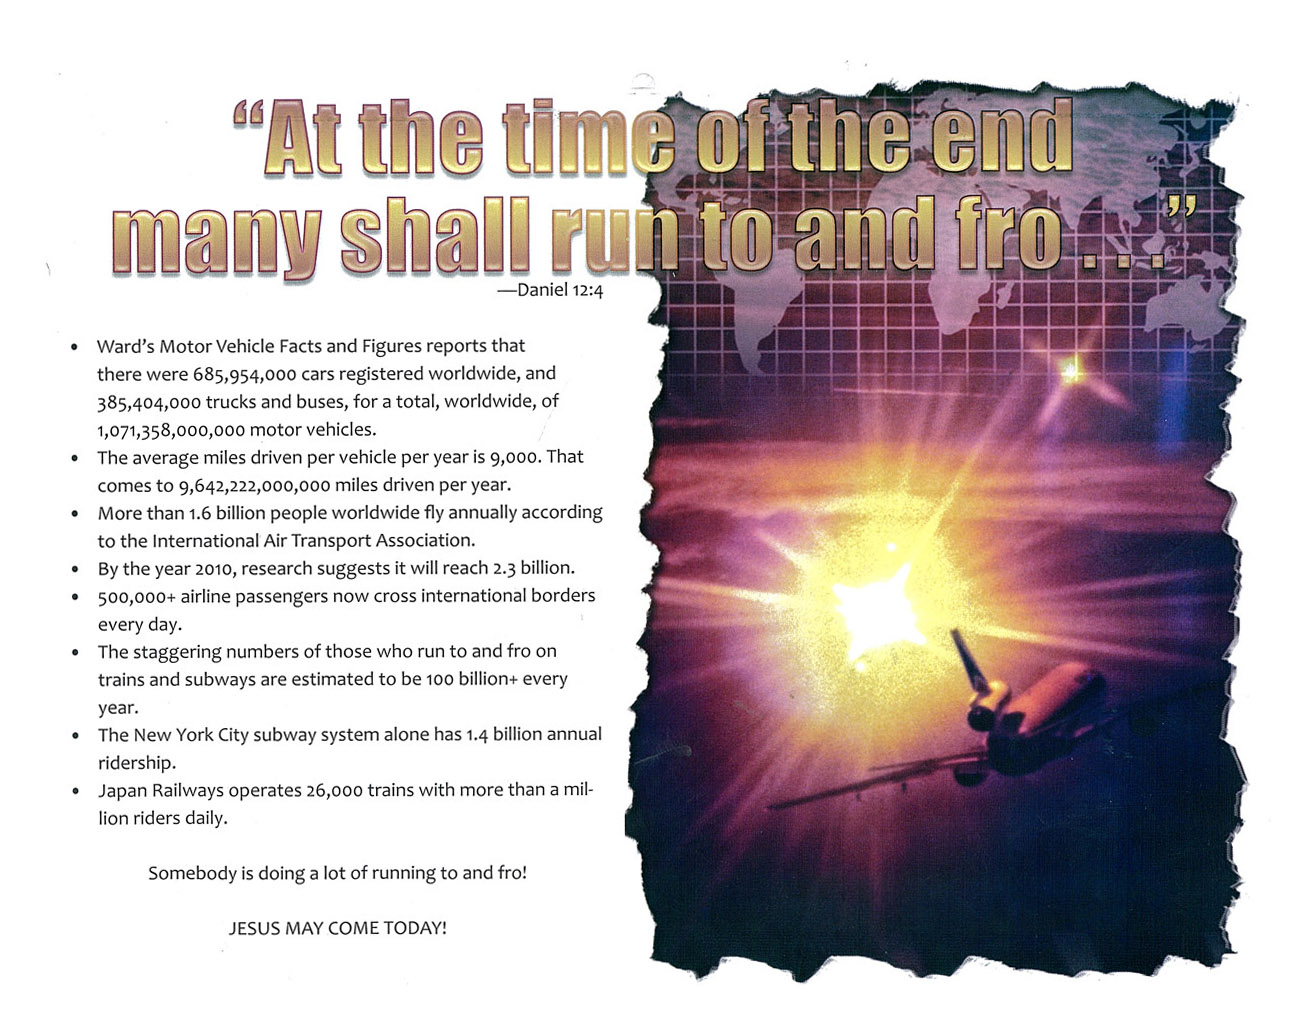 2009 Prophecy Calendar: February - At the time of the end many shall run to and fro ...